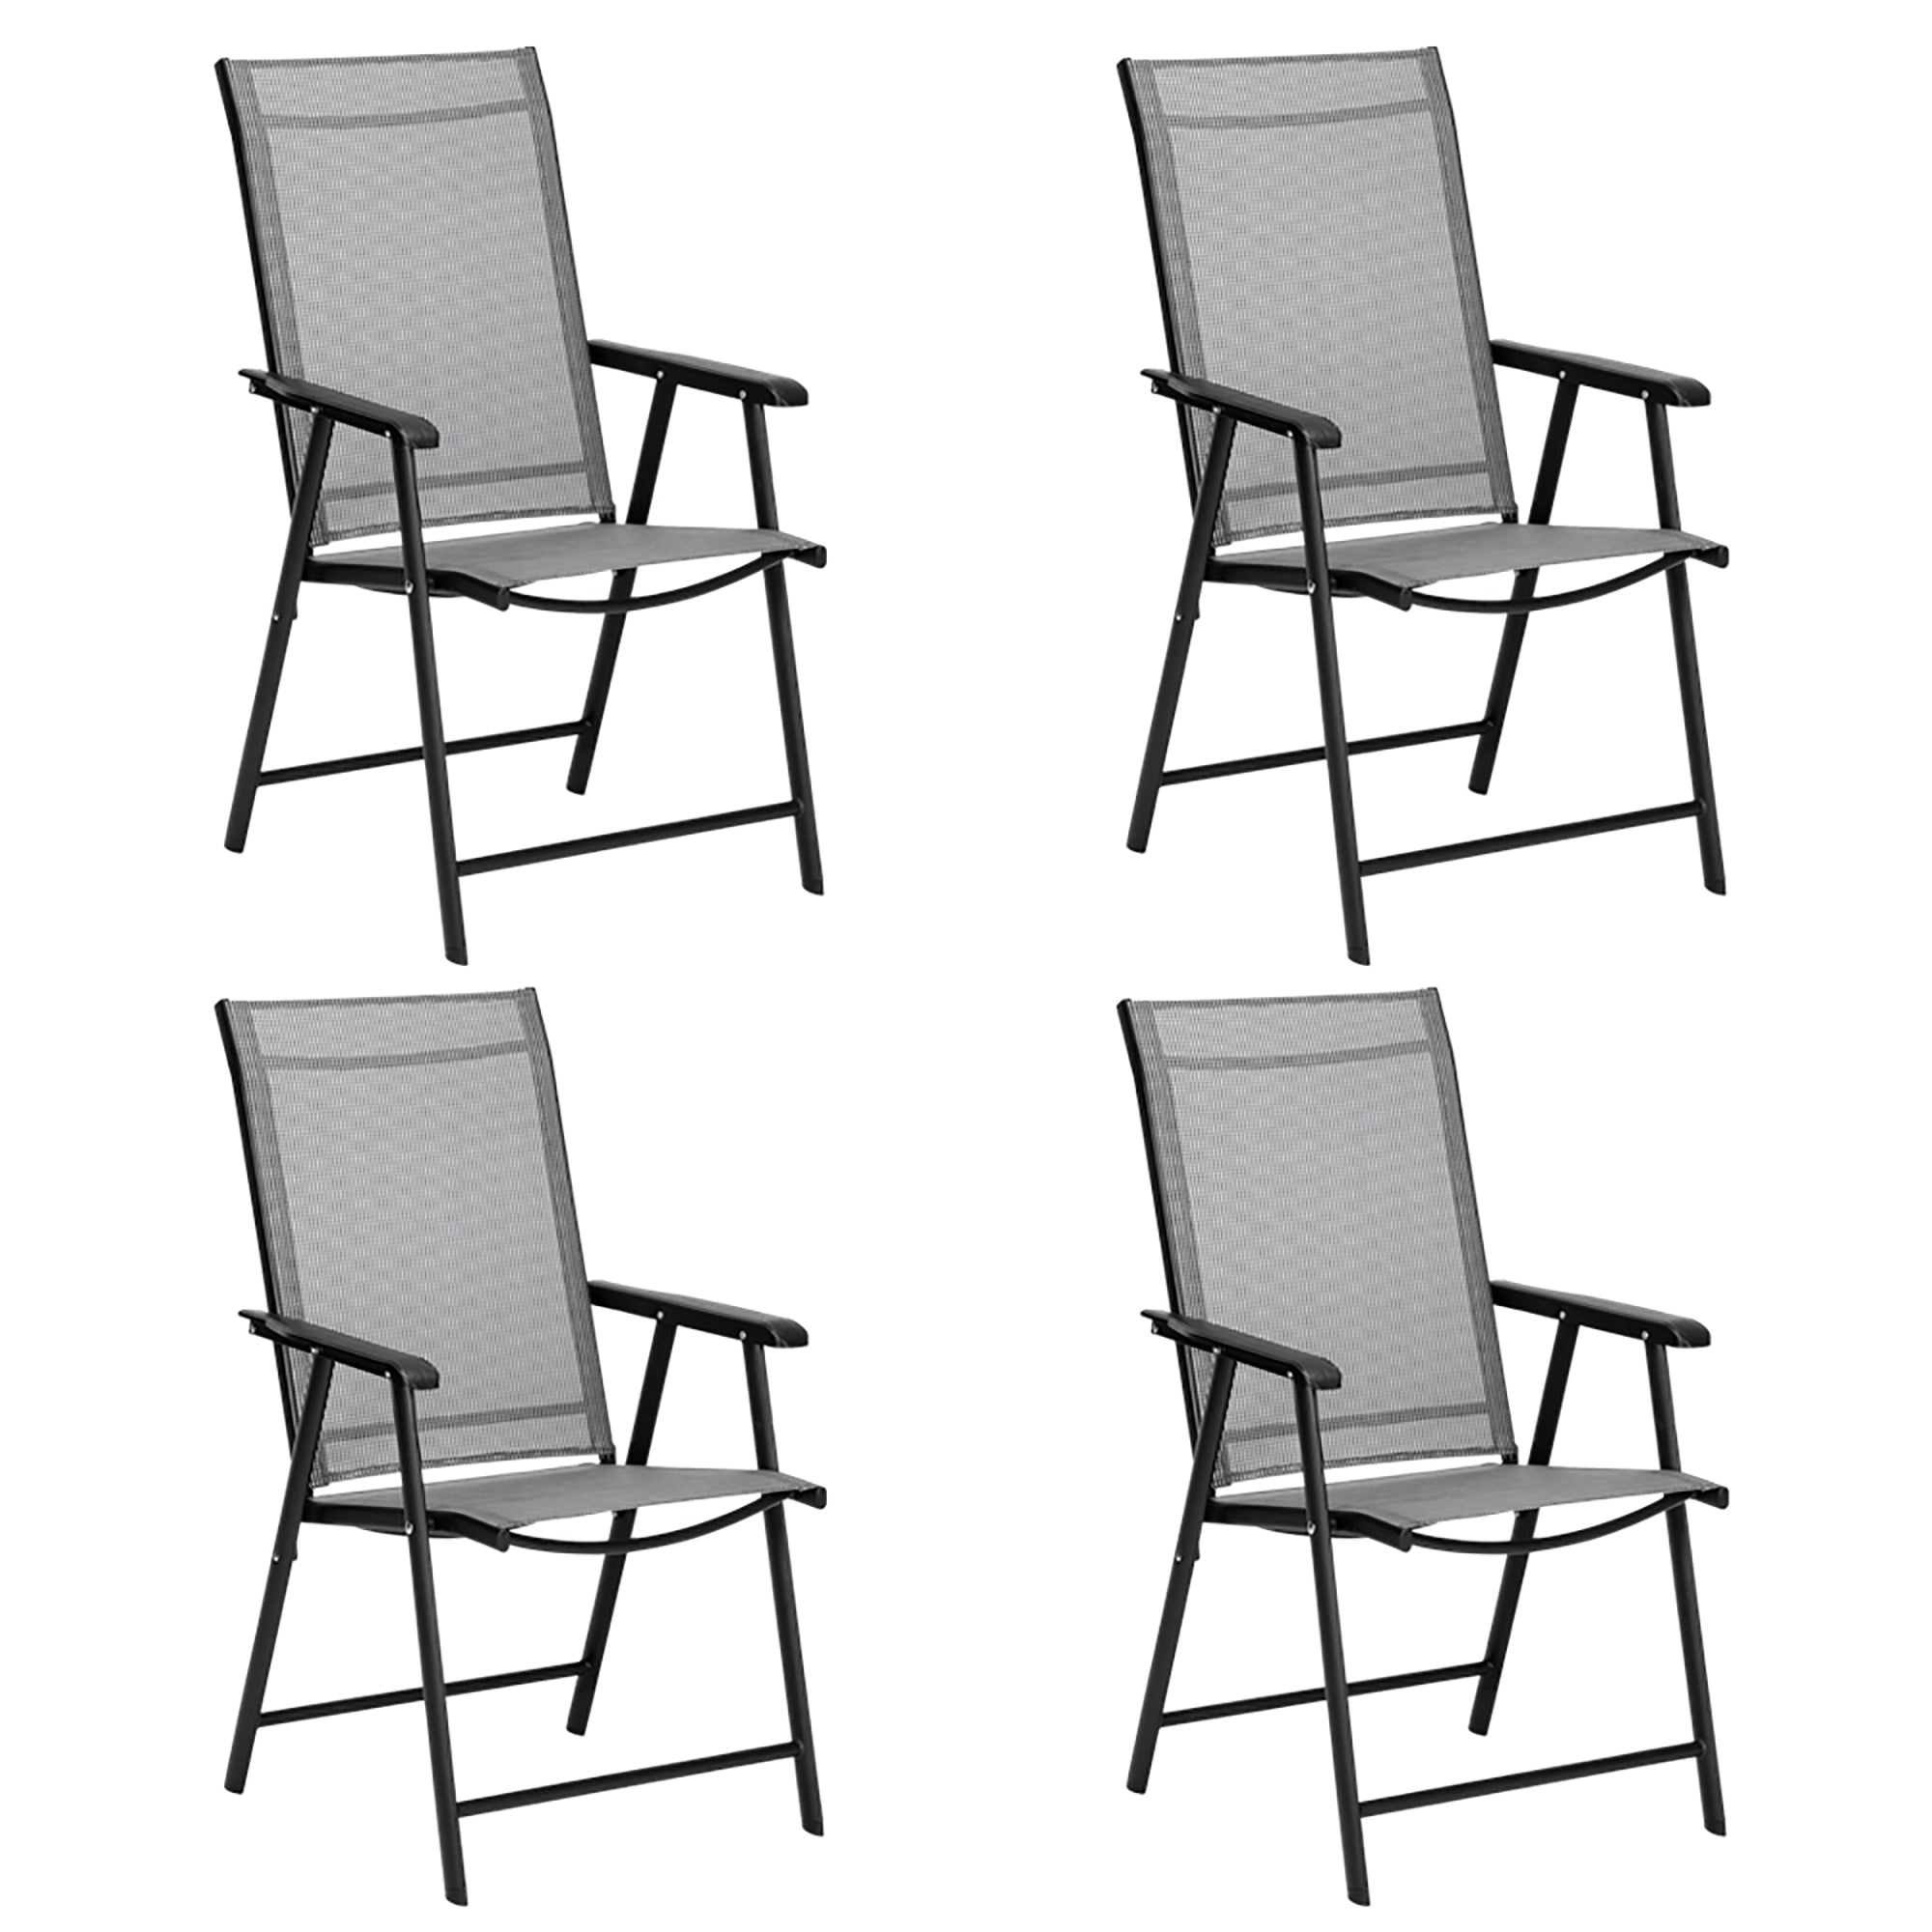 4-Pack Patio Folding Chairs Portable for Outdoor Camping, Beach, Deck Dining Chair with Armrest, Patio Textilene Chairs Set of 4, Gray-Boyel Living